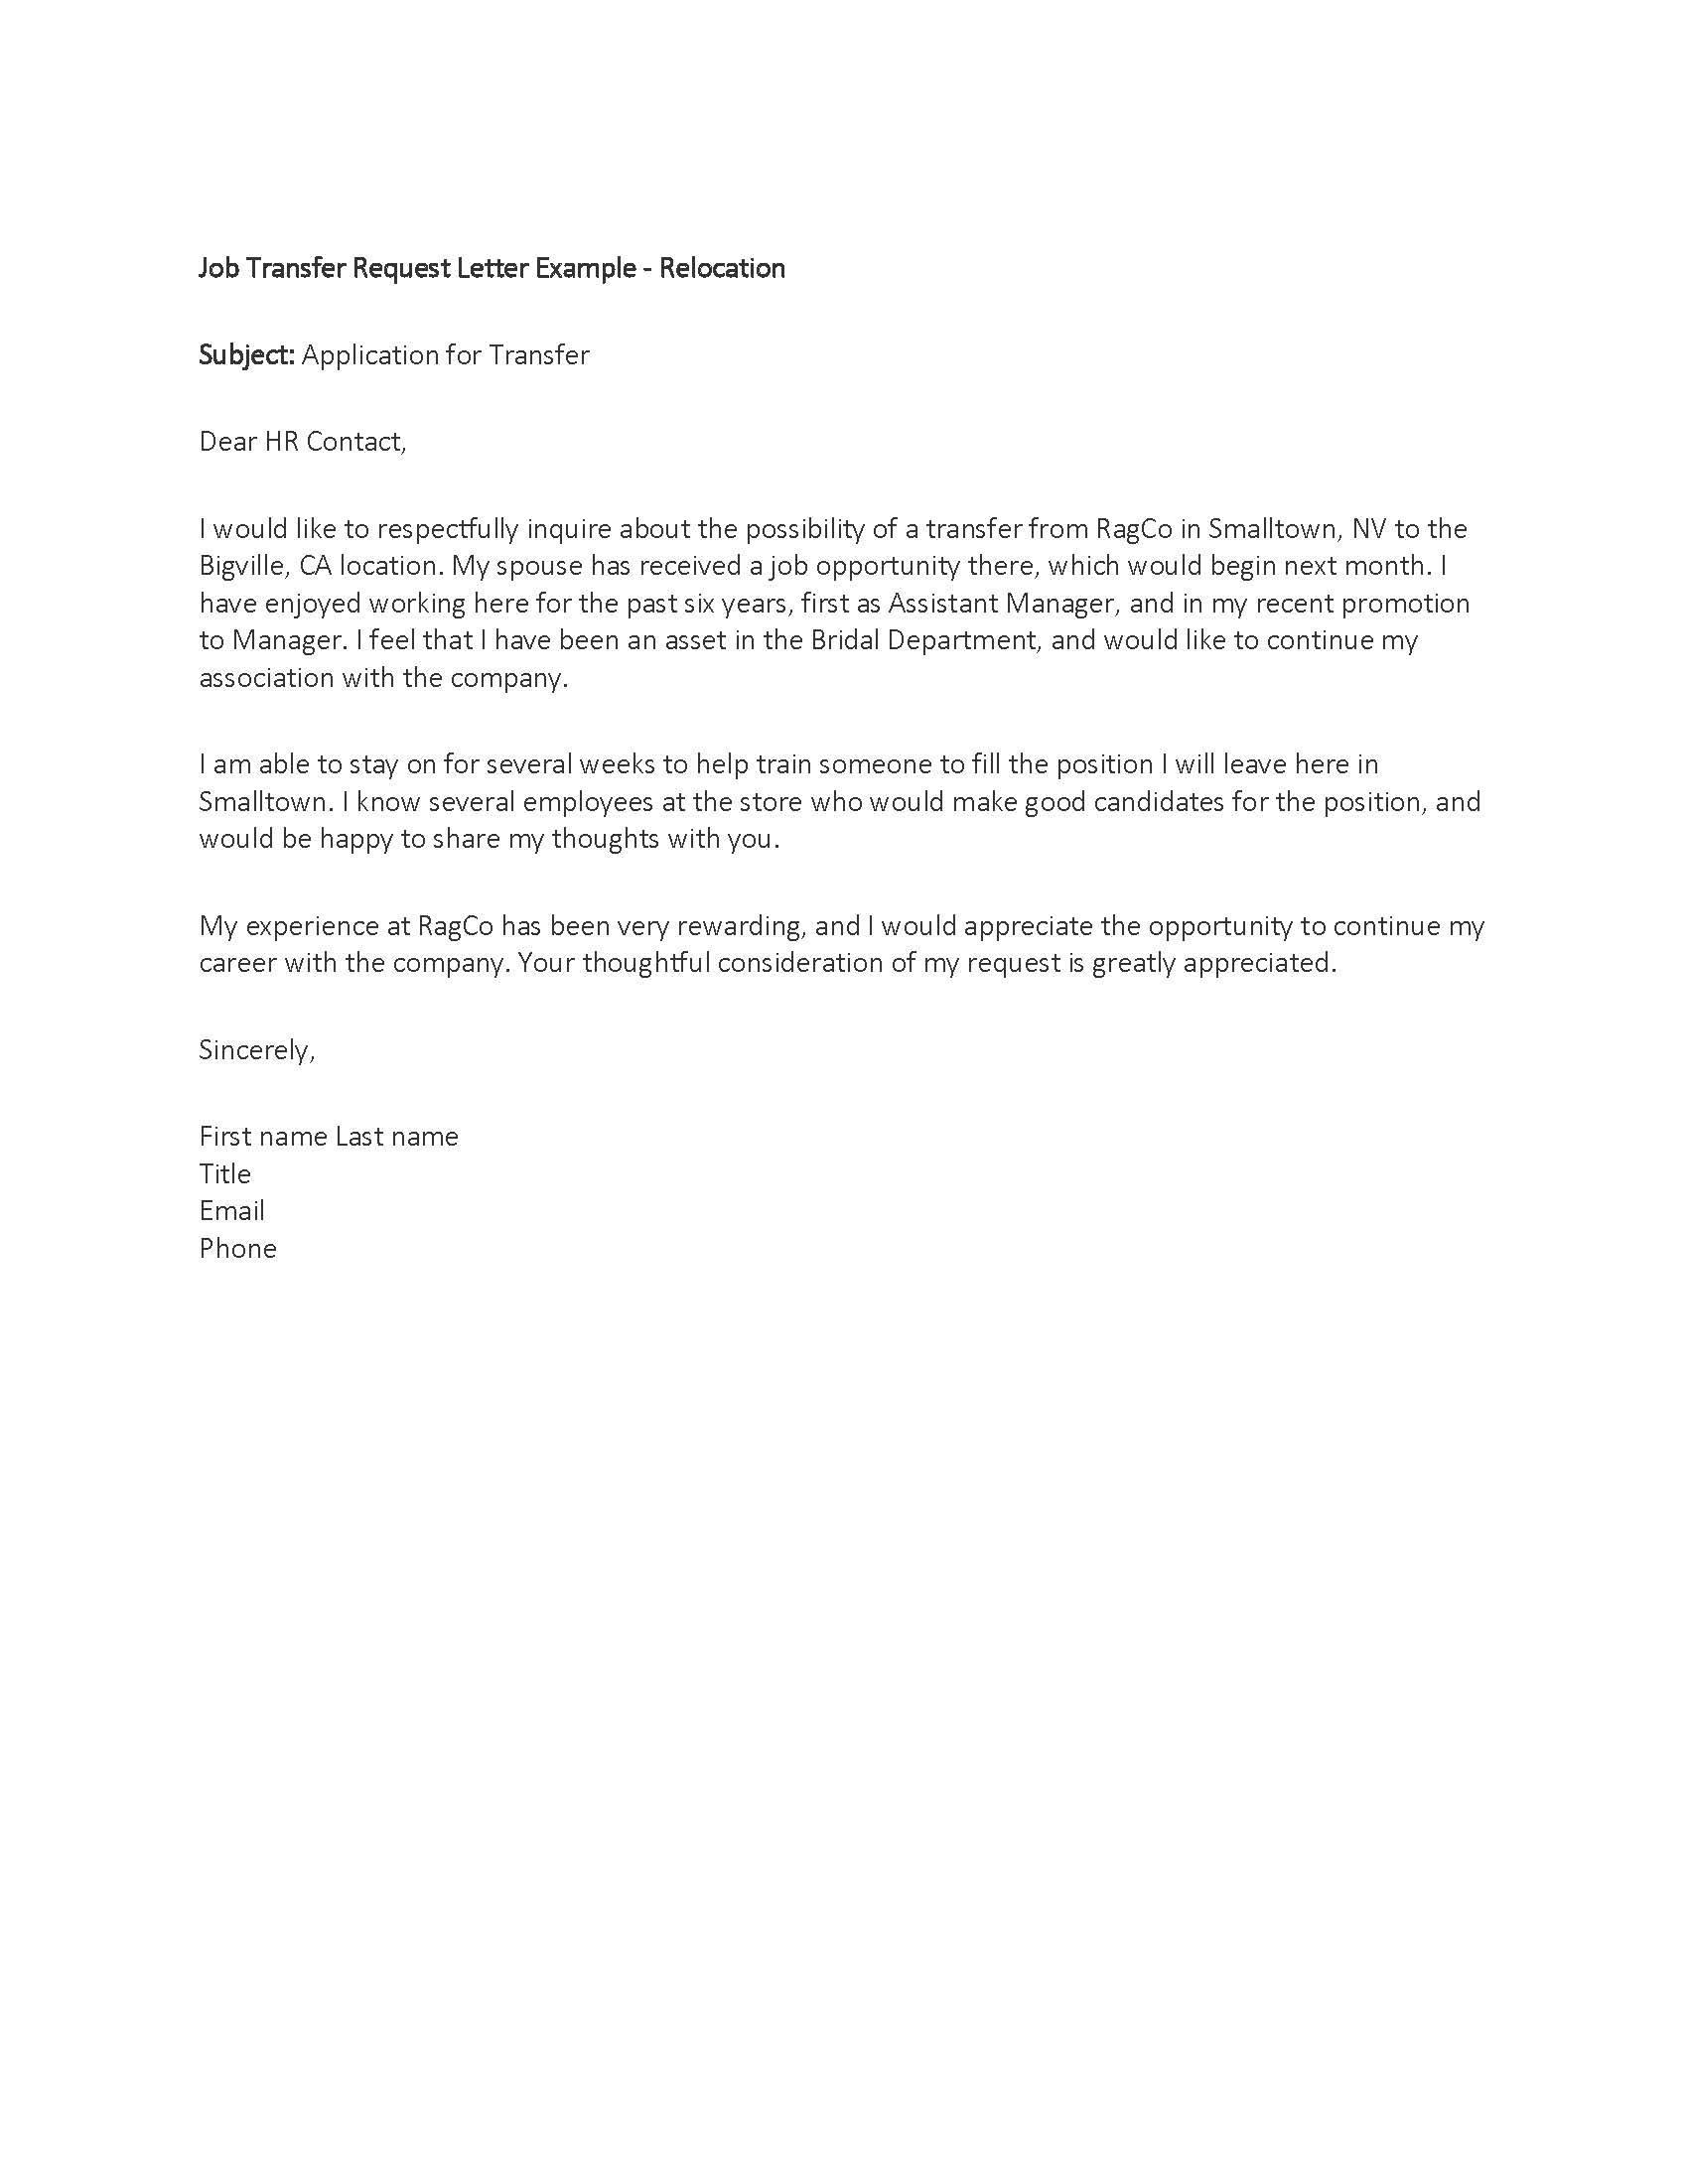 Transfer Letter Template - How to Write A Transfer Letter to An Employee Gallery Letter